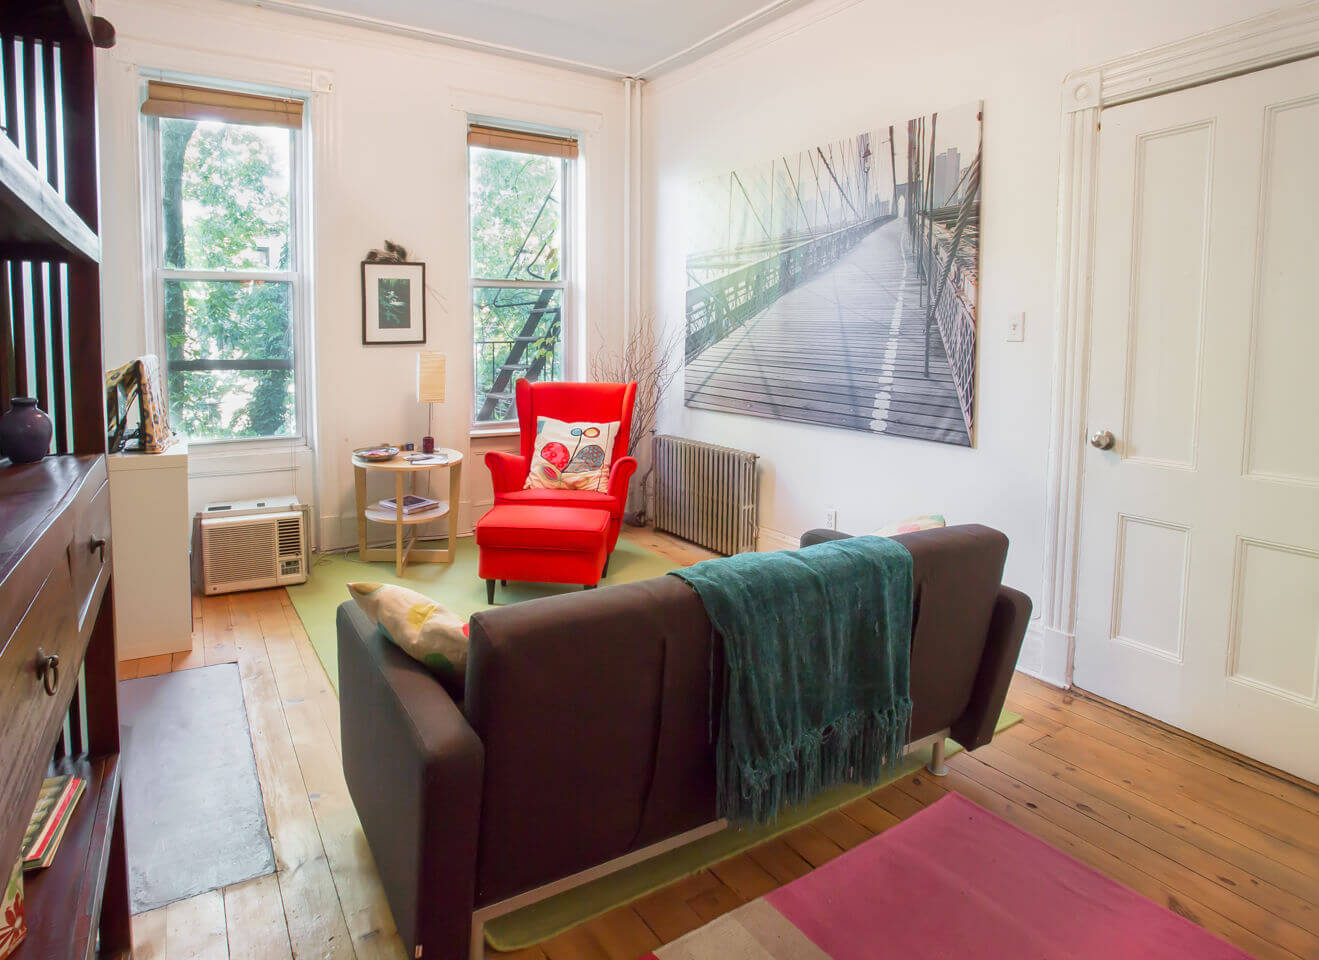 Brooklyn Homes for Sale in Park Slope at 509 11th Street